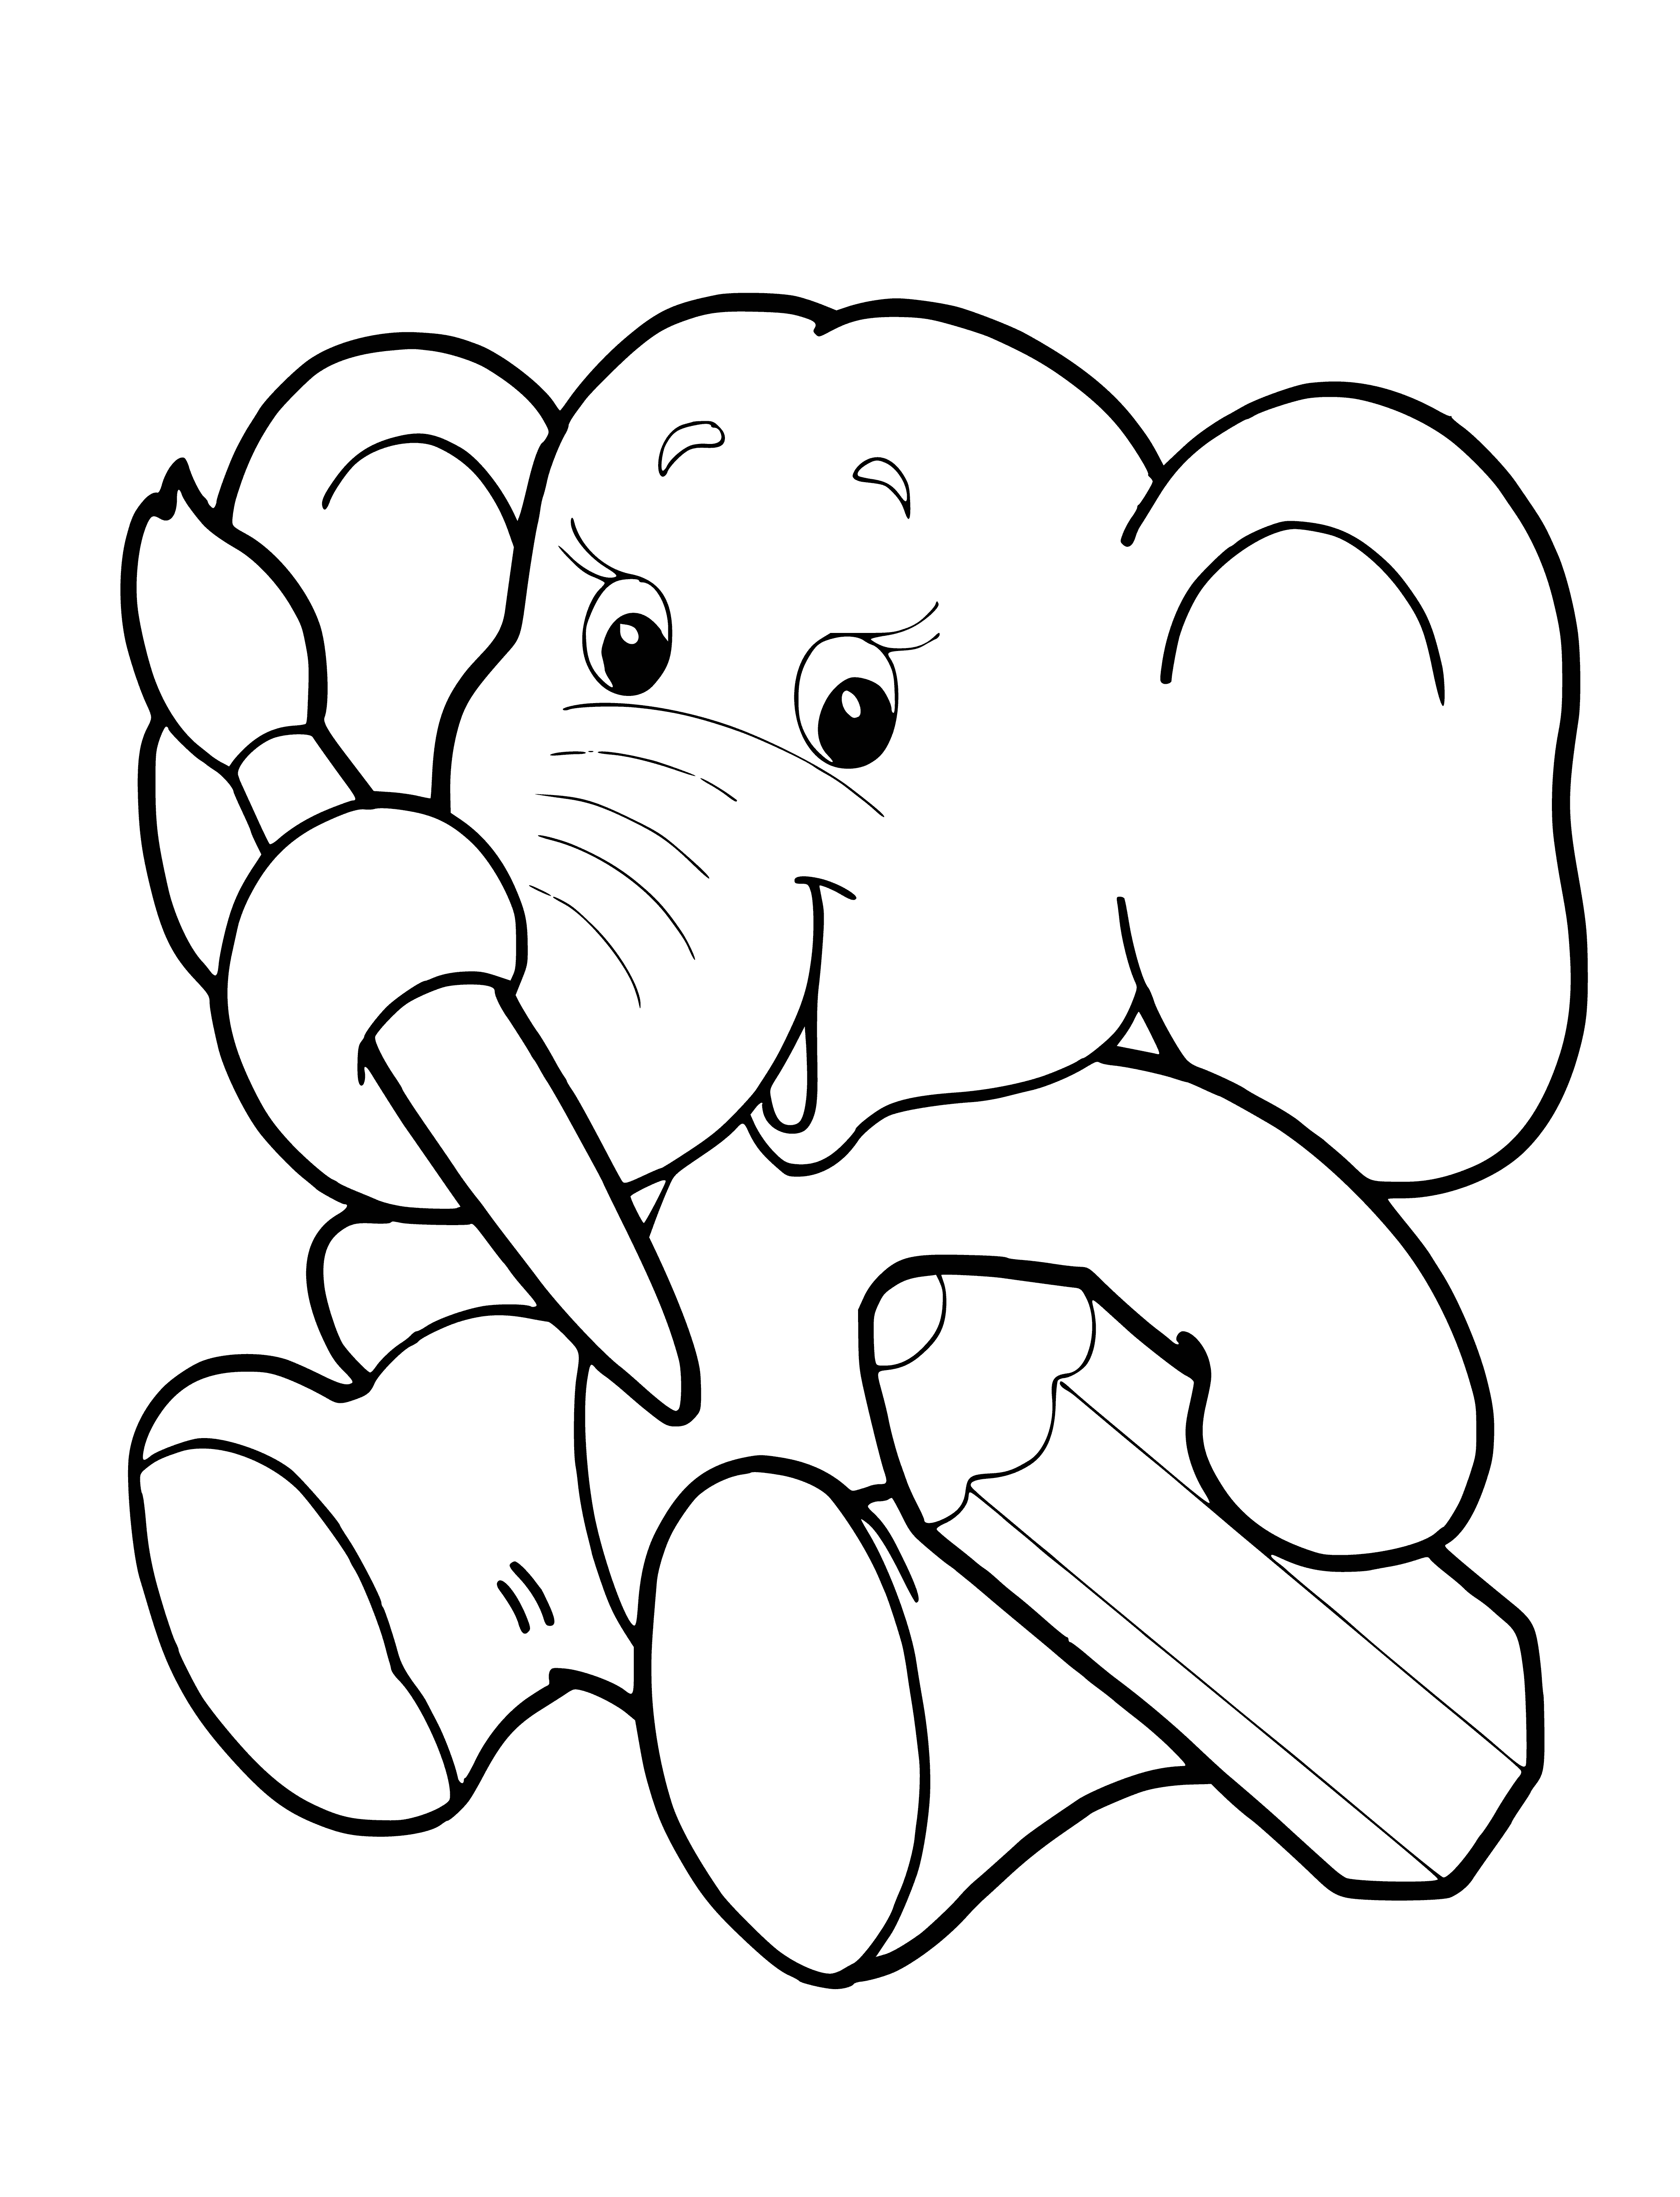 coloring page: A baby elephant stands on a river bank, grey with a trunk and big ears, small eyes, and legs. A hippopotamus is in the river.